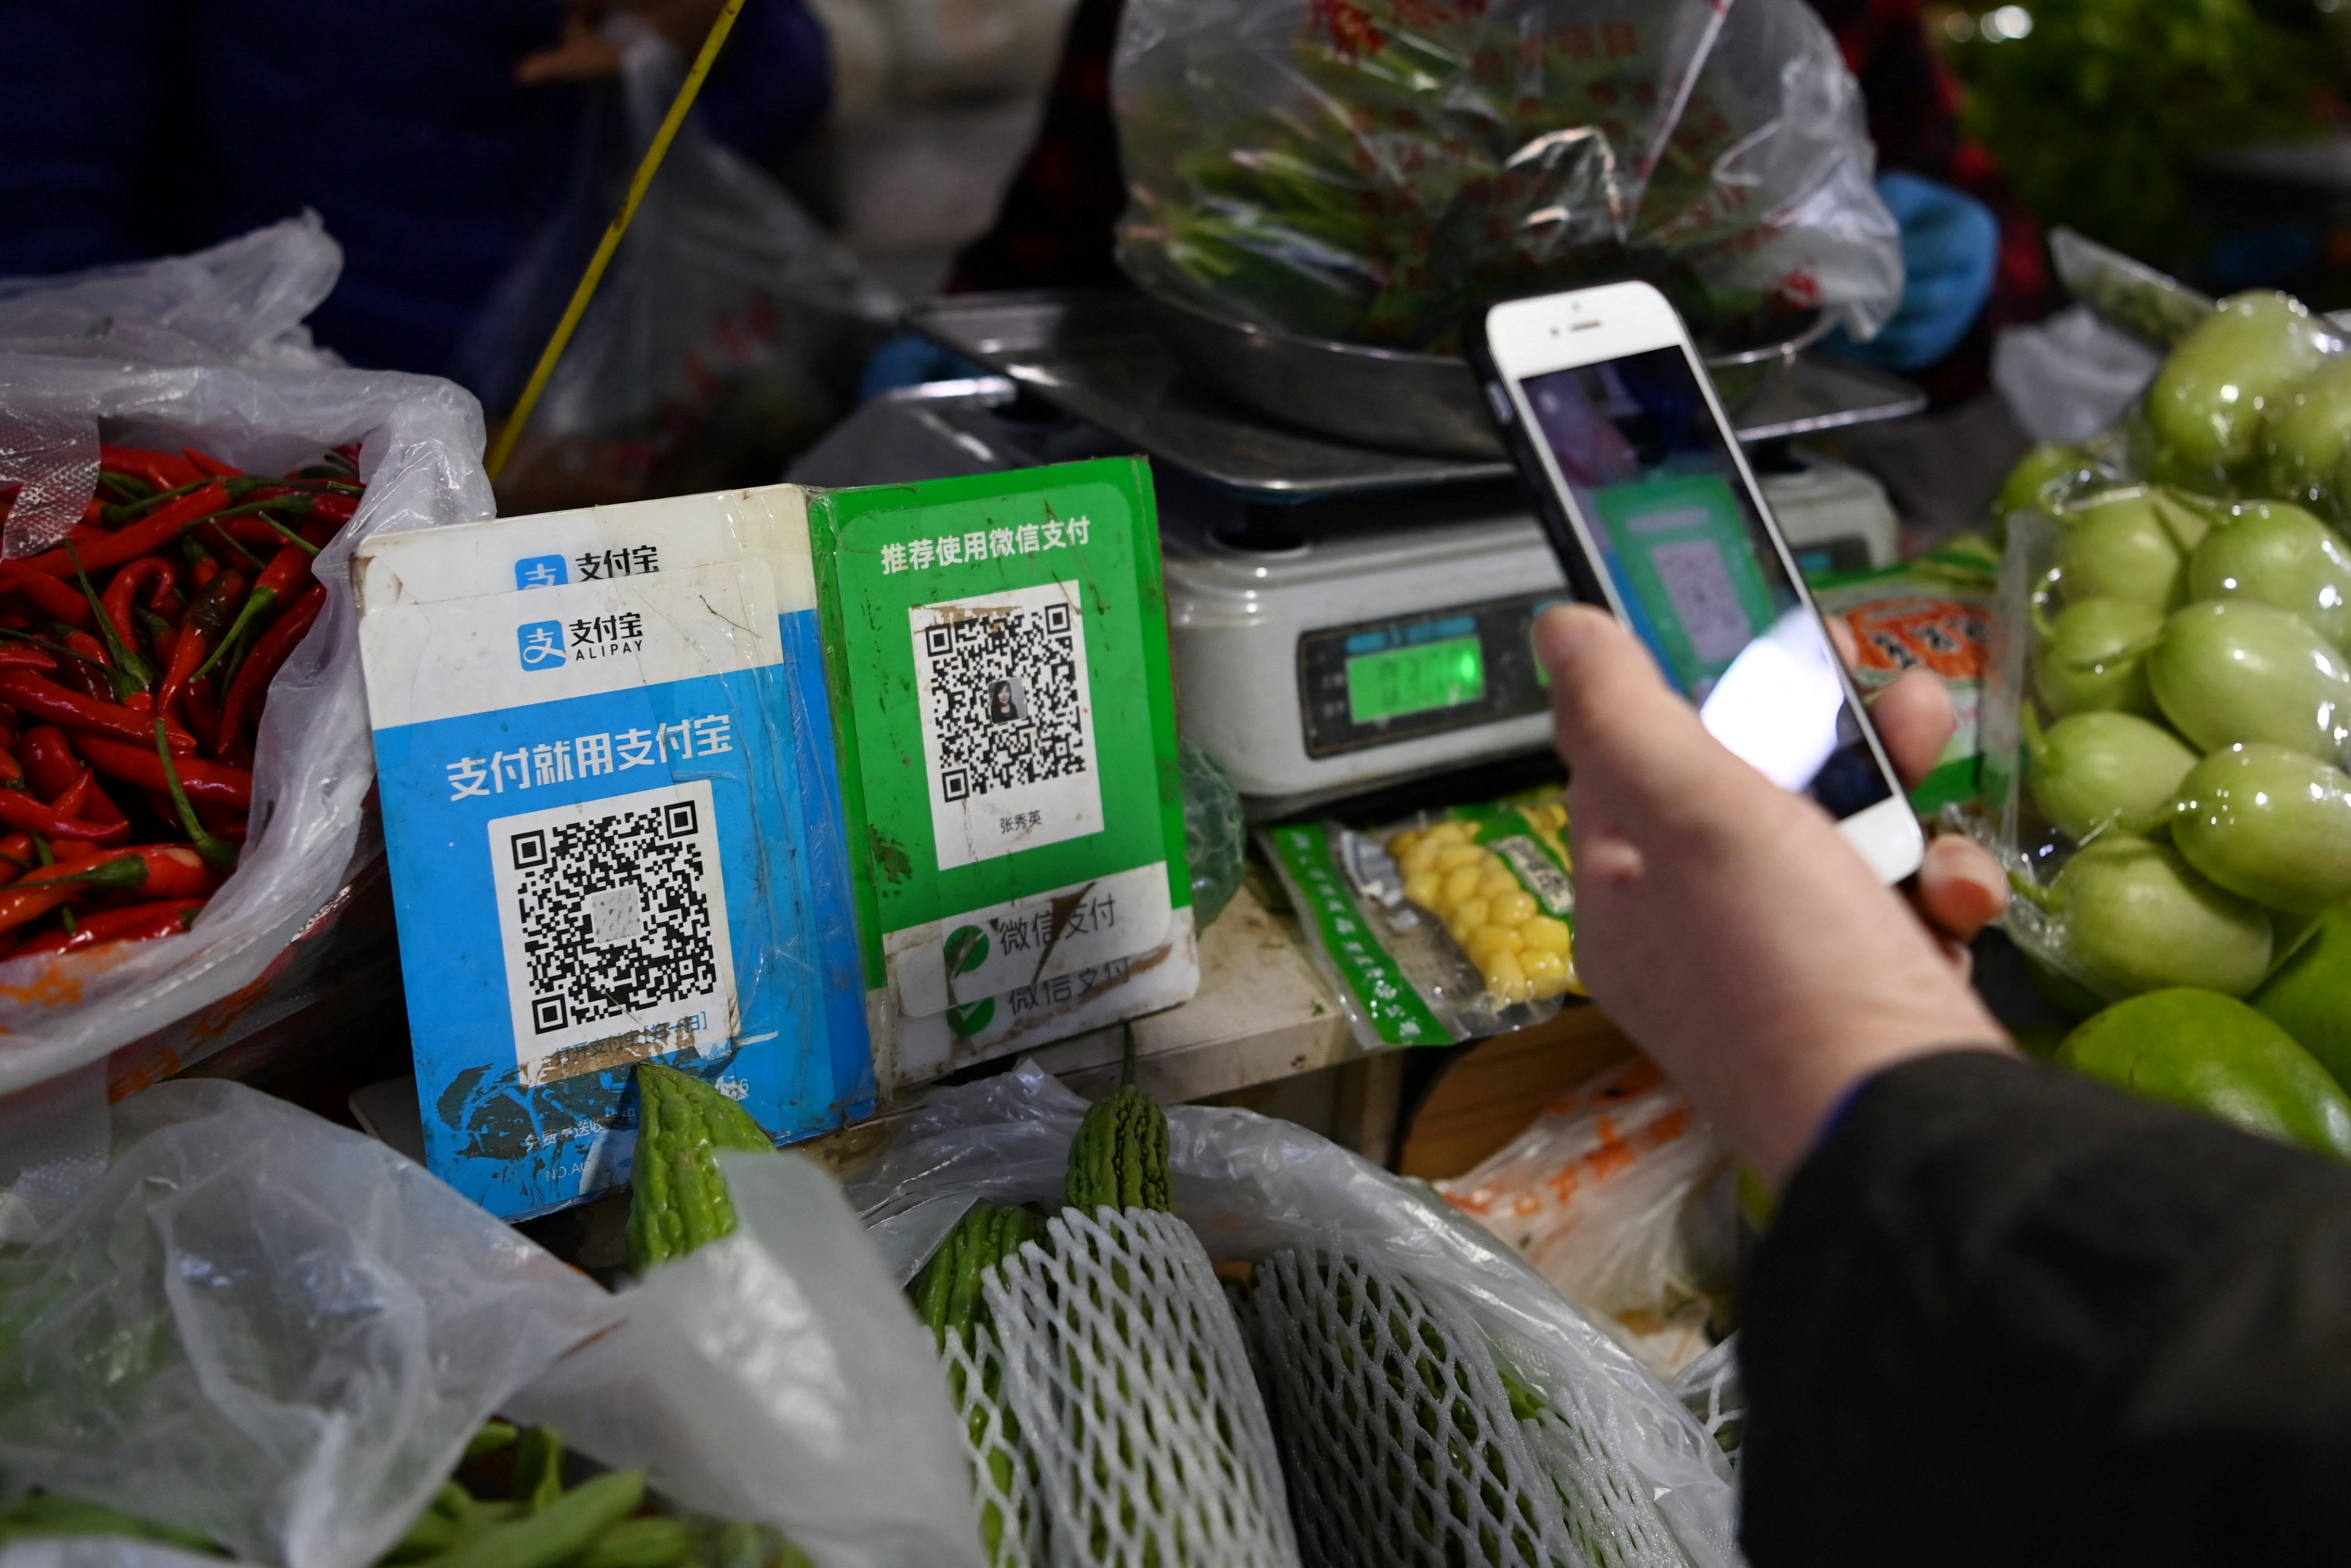 A customer pays for produce in China via QR payment code scanned by her smartphone. Photo: AFP